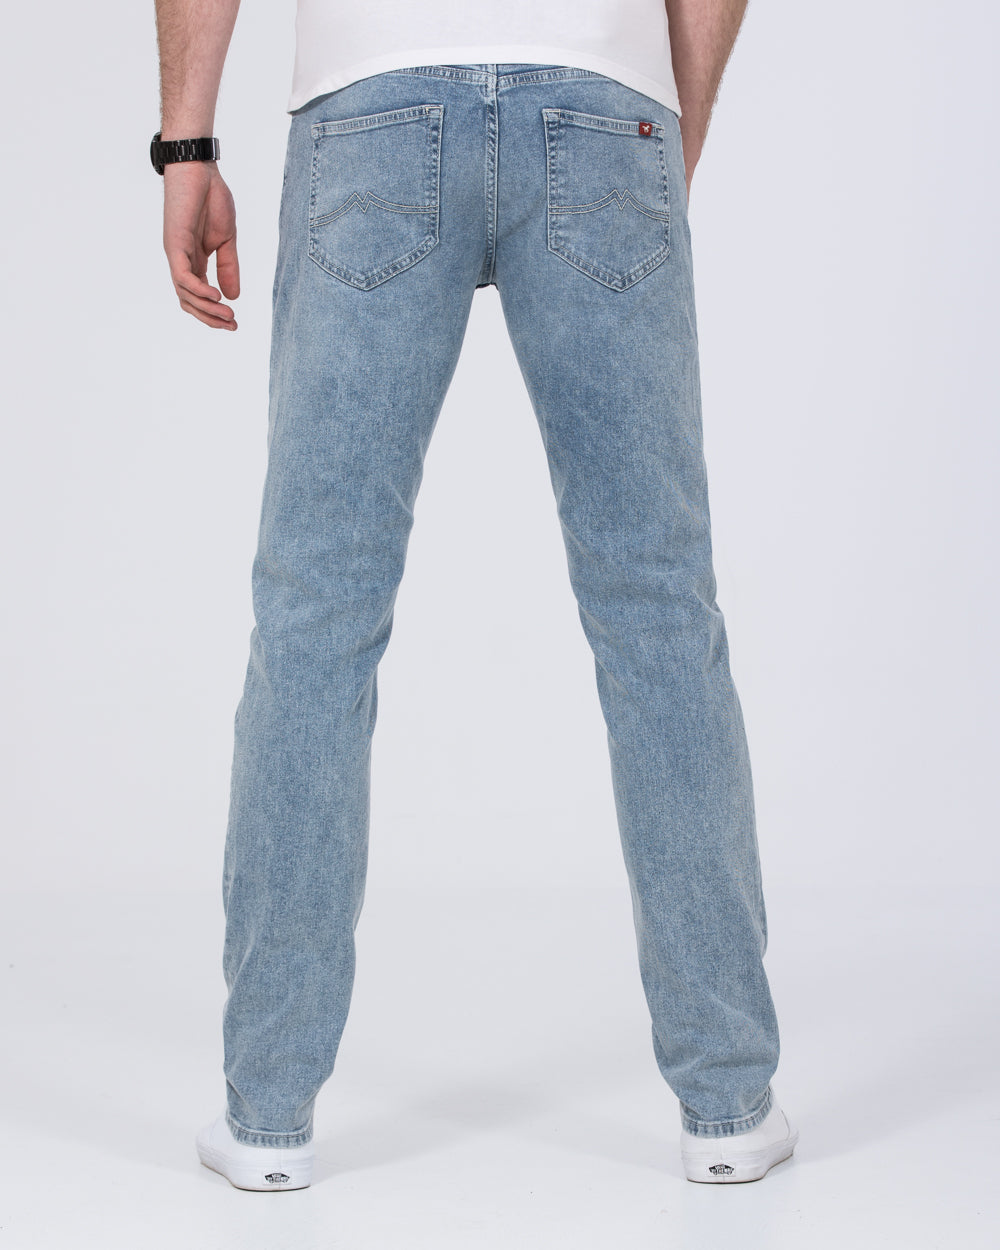 Mustang Oregon Slim Fit Tall Jeans (light wash)